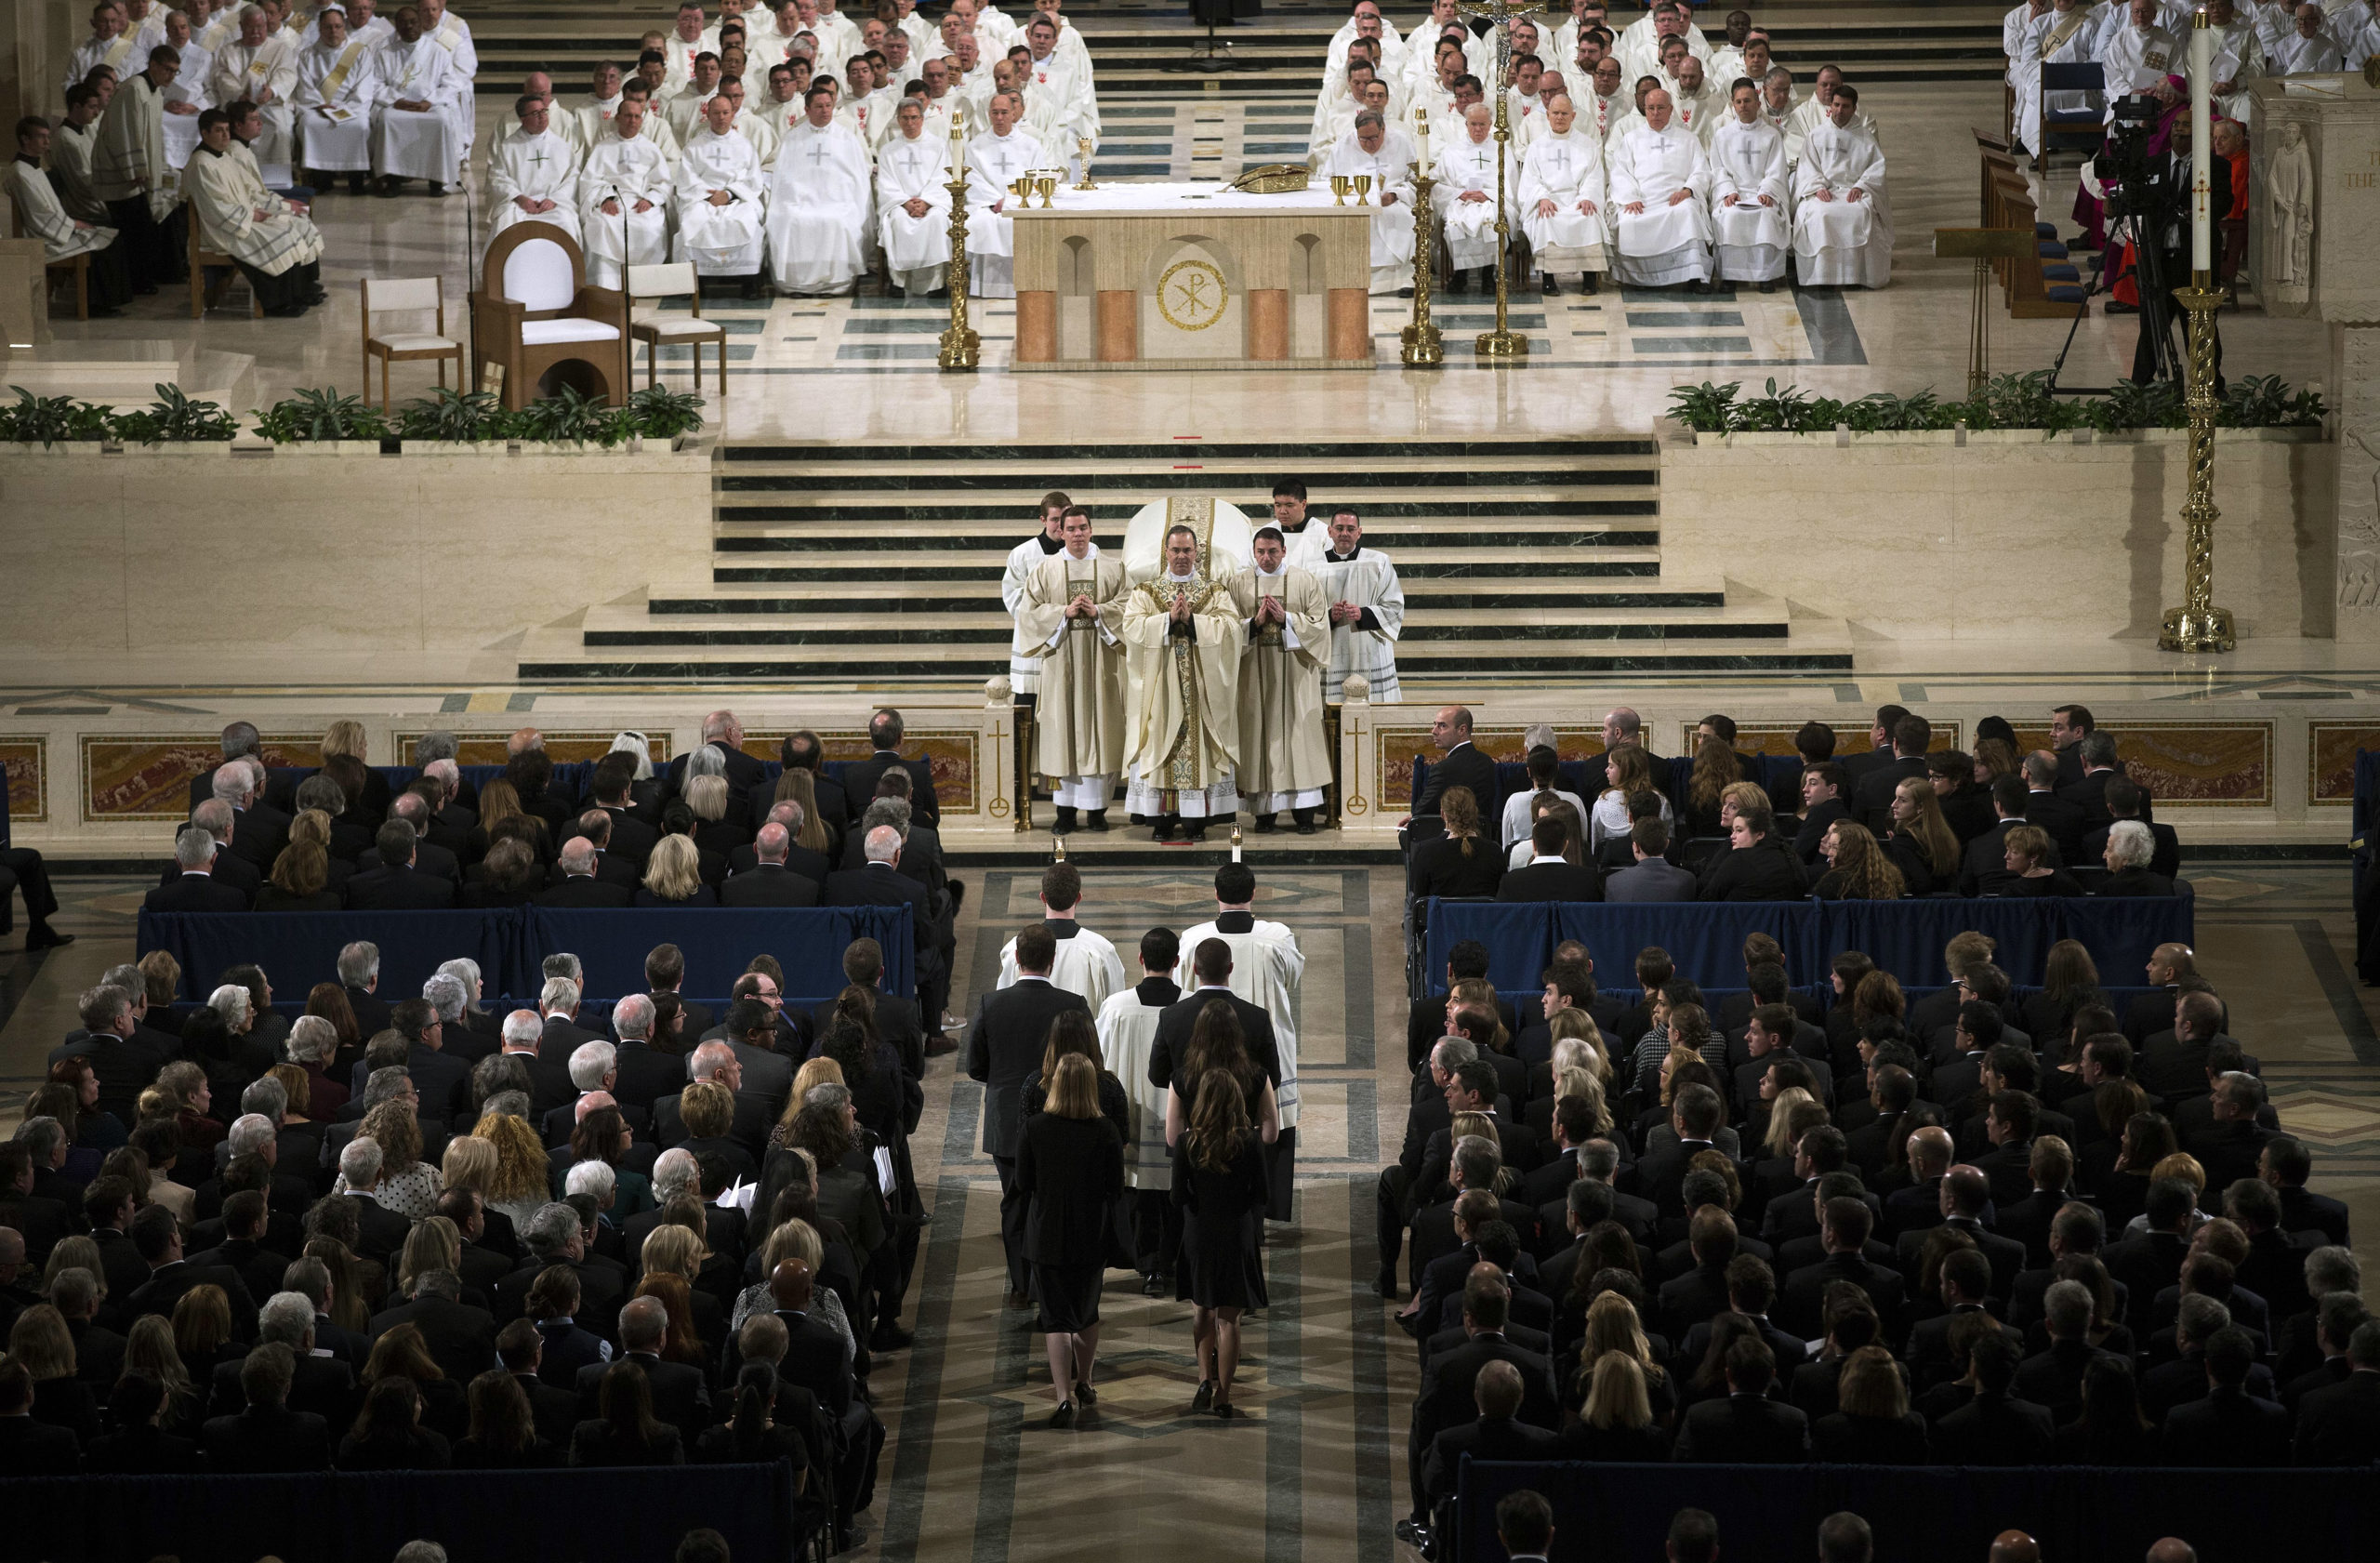 Father Paul Scalia, son of Justice Antonin Scalia, leads the funeral Mass for Associate Justice Antonin Scalia at the Basilica of the National Shrine of the Immaculate Conception February 20, 2016 in Washington, DC. Scalia, who died February 13 while on a hunting trip in Texas, layed in repose in the Great Hall of the Supreme Court on Friday and his funeral service will be at the basillica today. (Photo by Doug Mills-Pool/Getty Images)